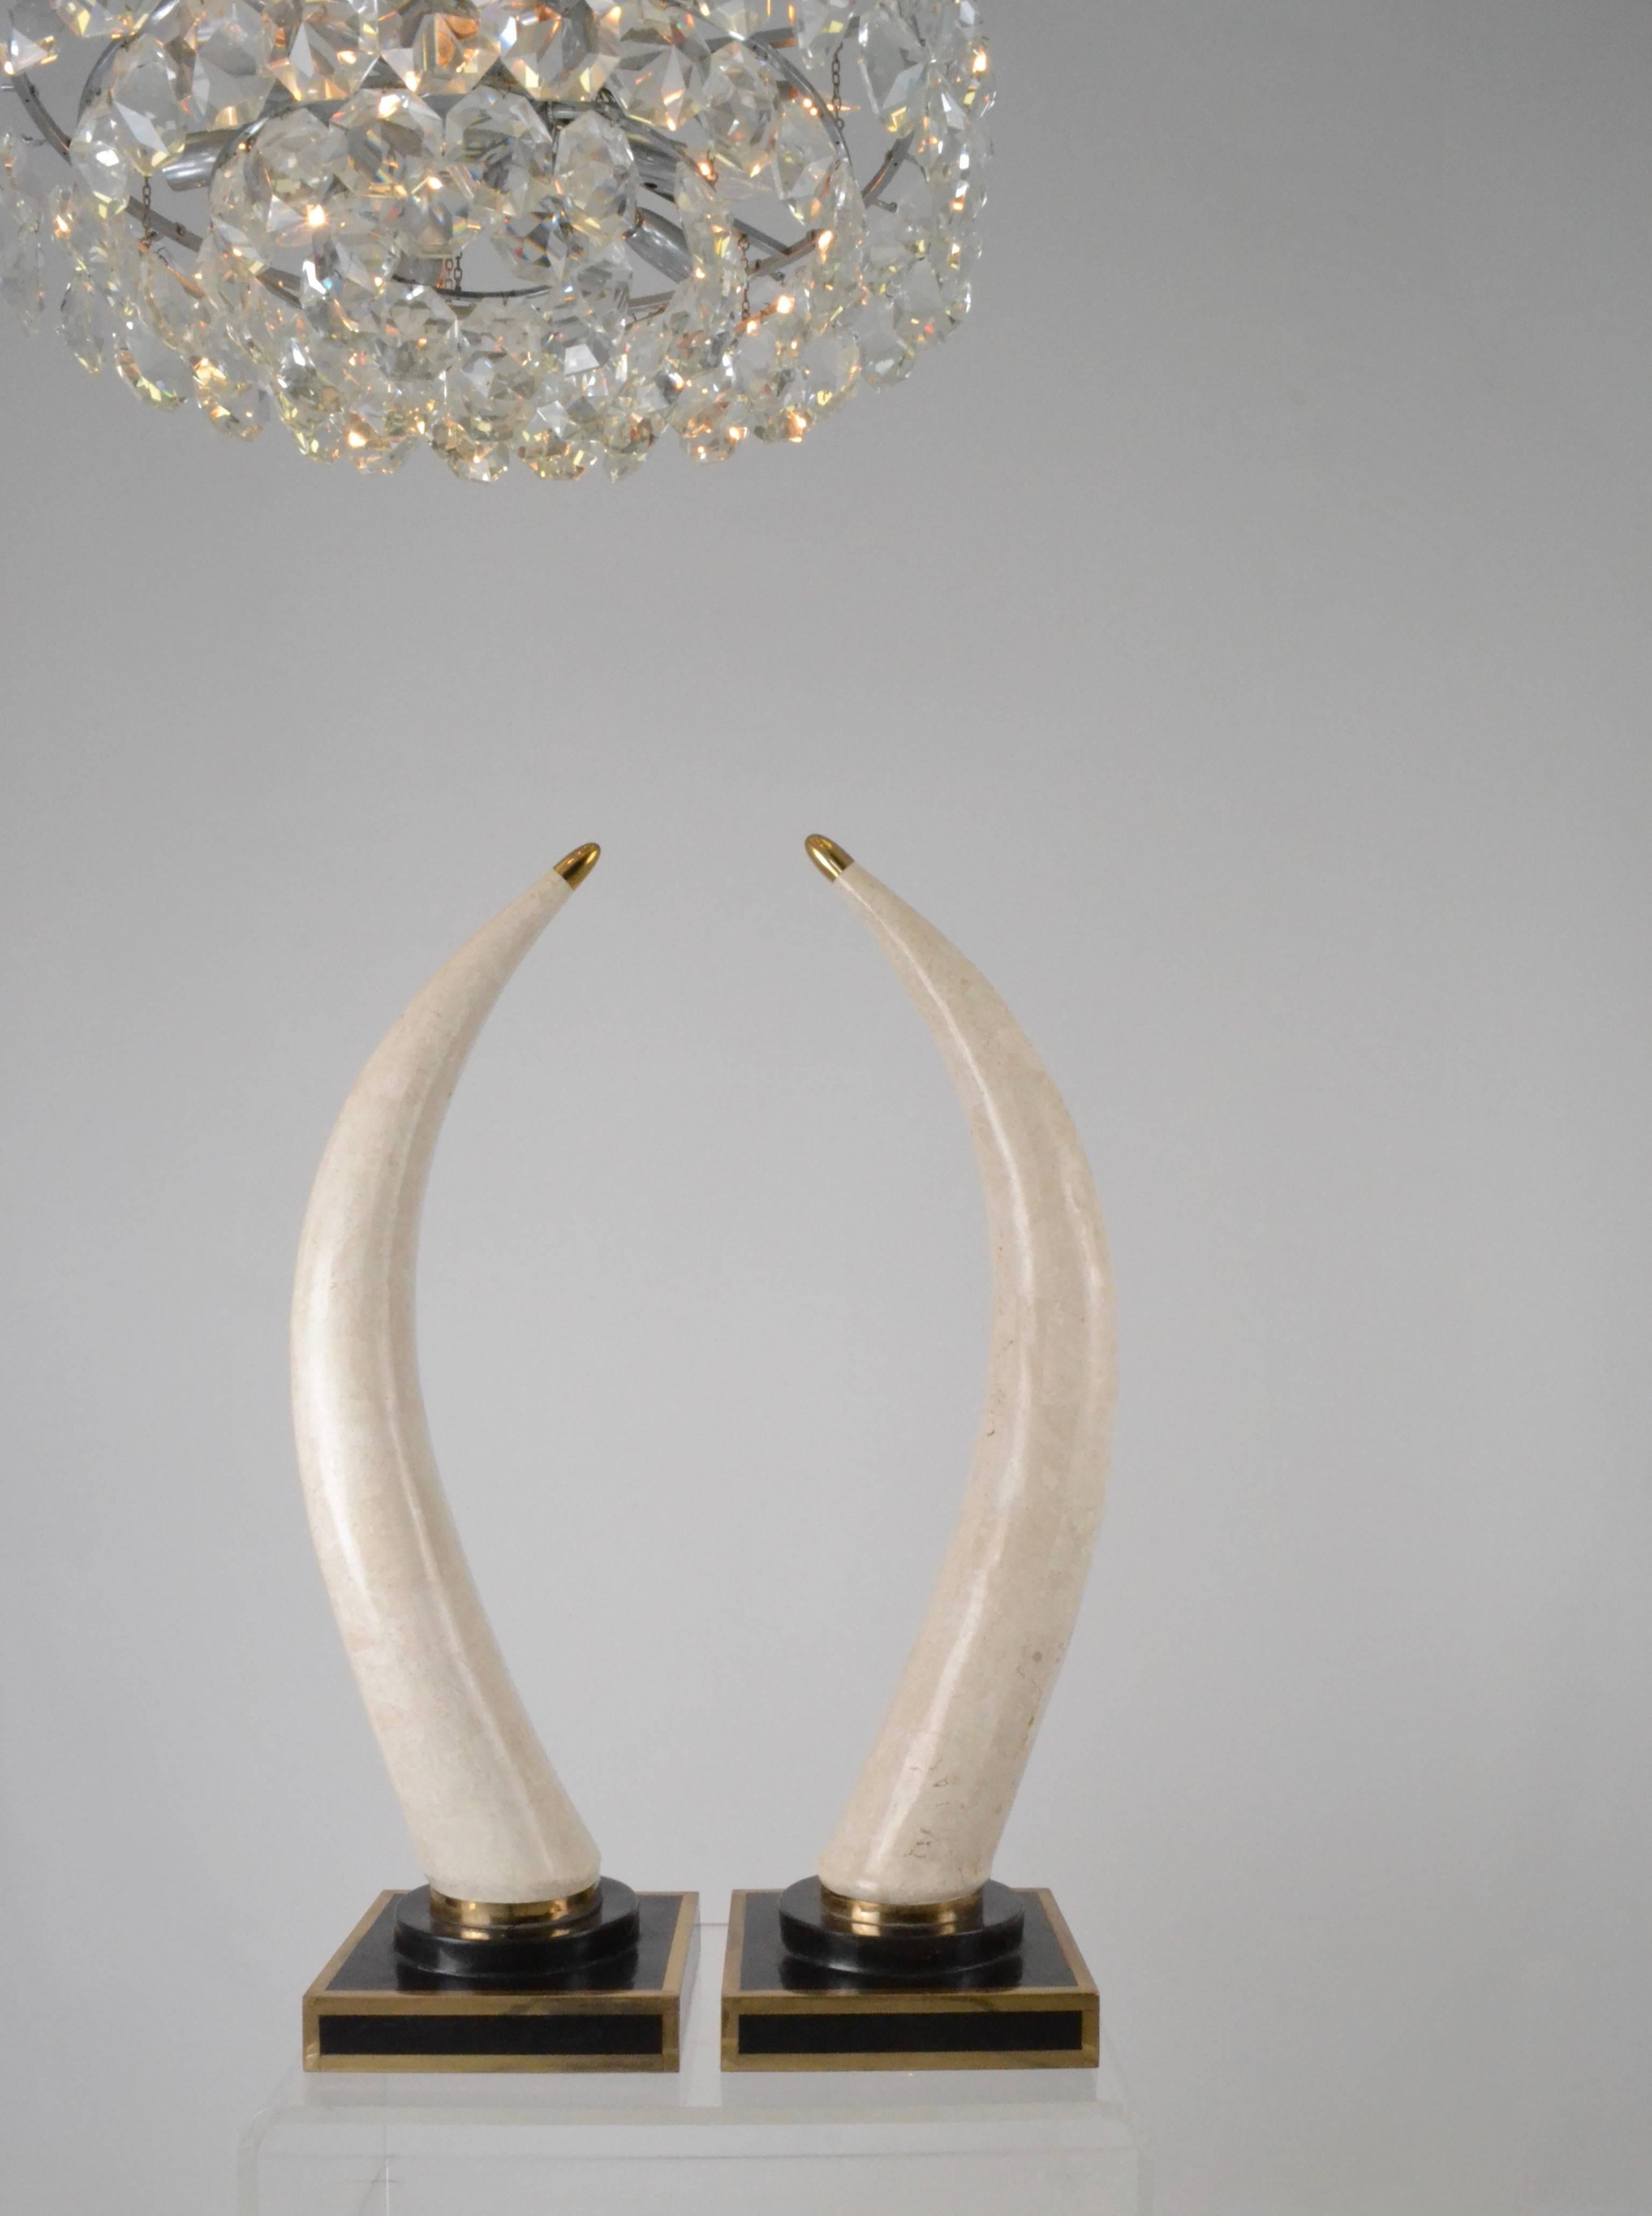 So glam! Hollywood Regency-style tessellated marble tusks. This pair is almost three feet high, dramatic and impressive. Very fine condition with original Beverly Hills retailer stickers on bottom.